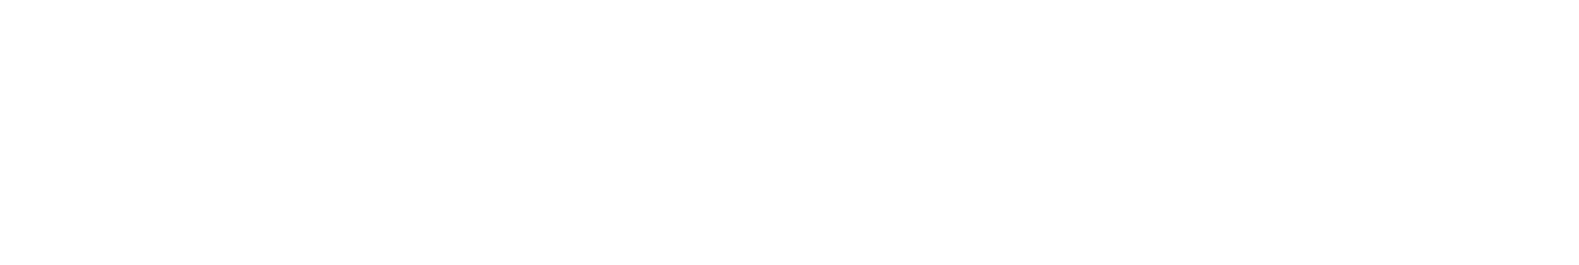 Hilton Grand Vacations
 logo large for dark backgrounds (transparent PNG)